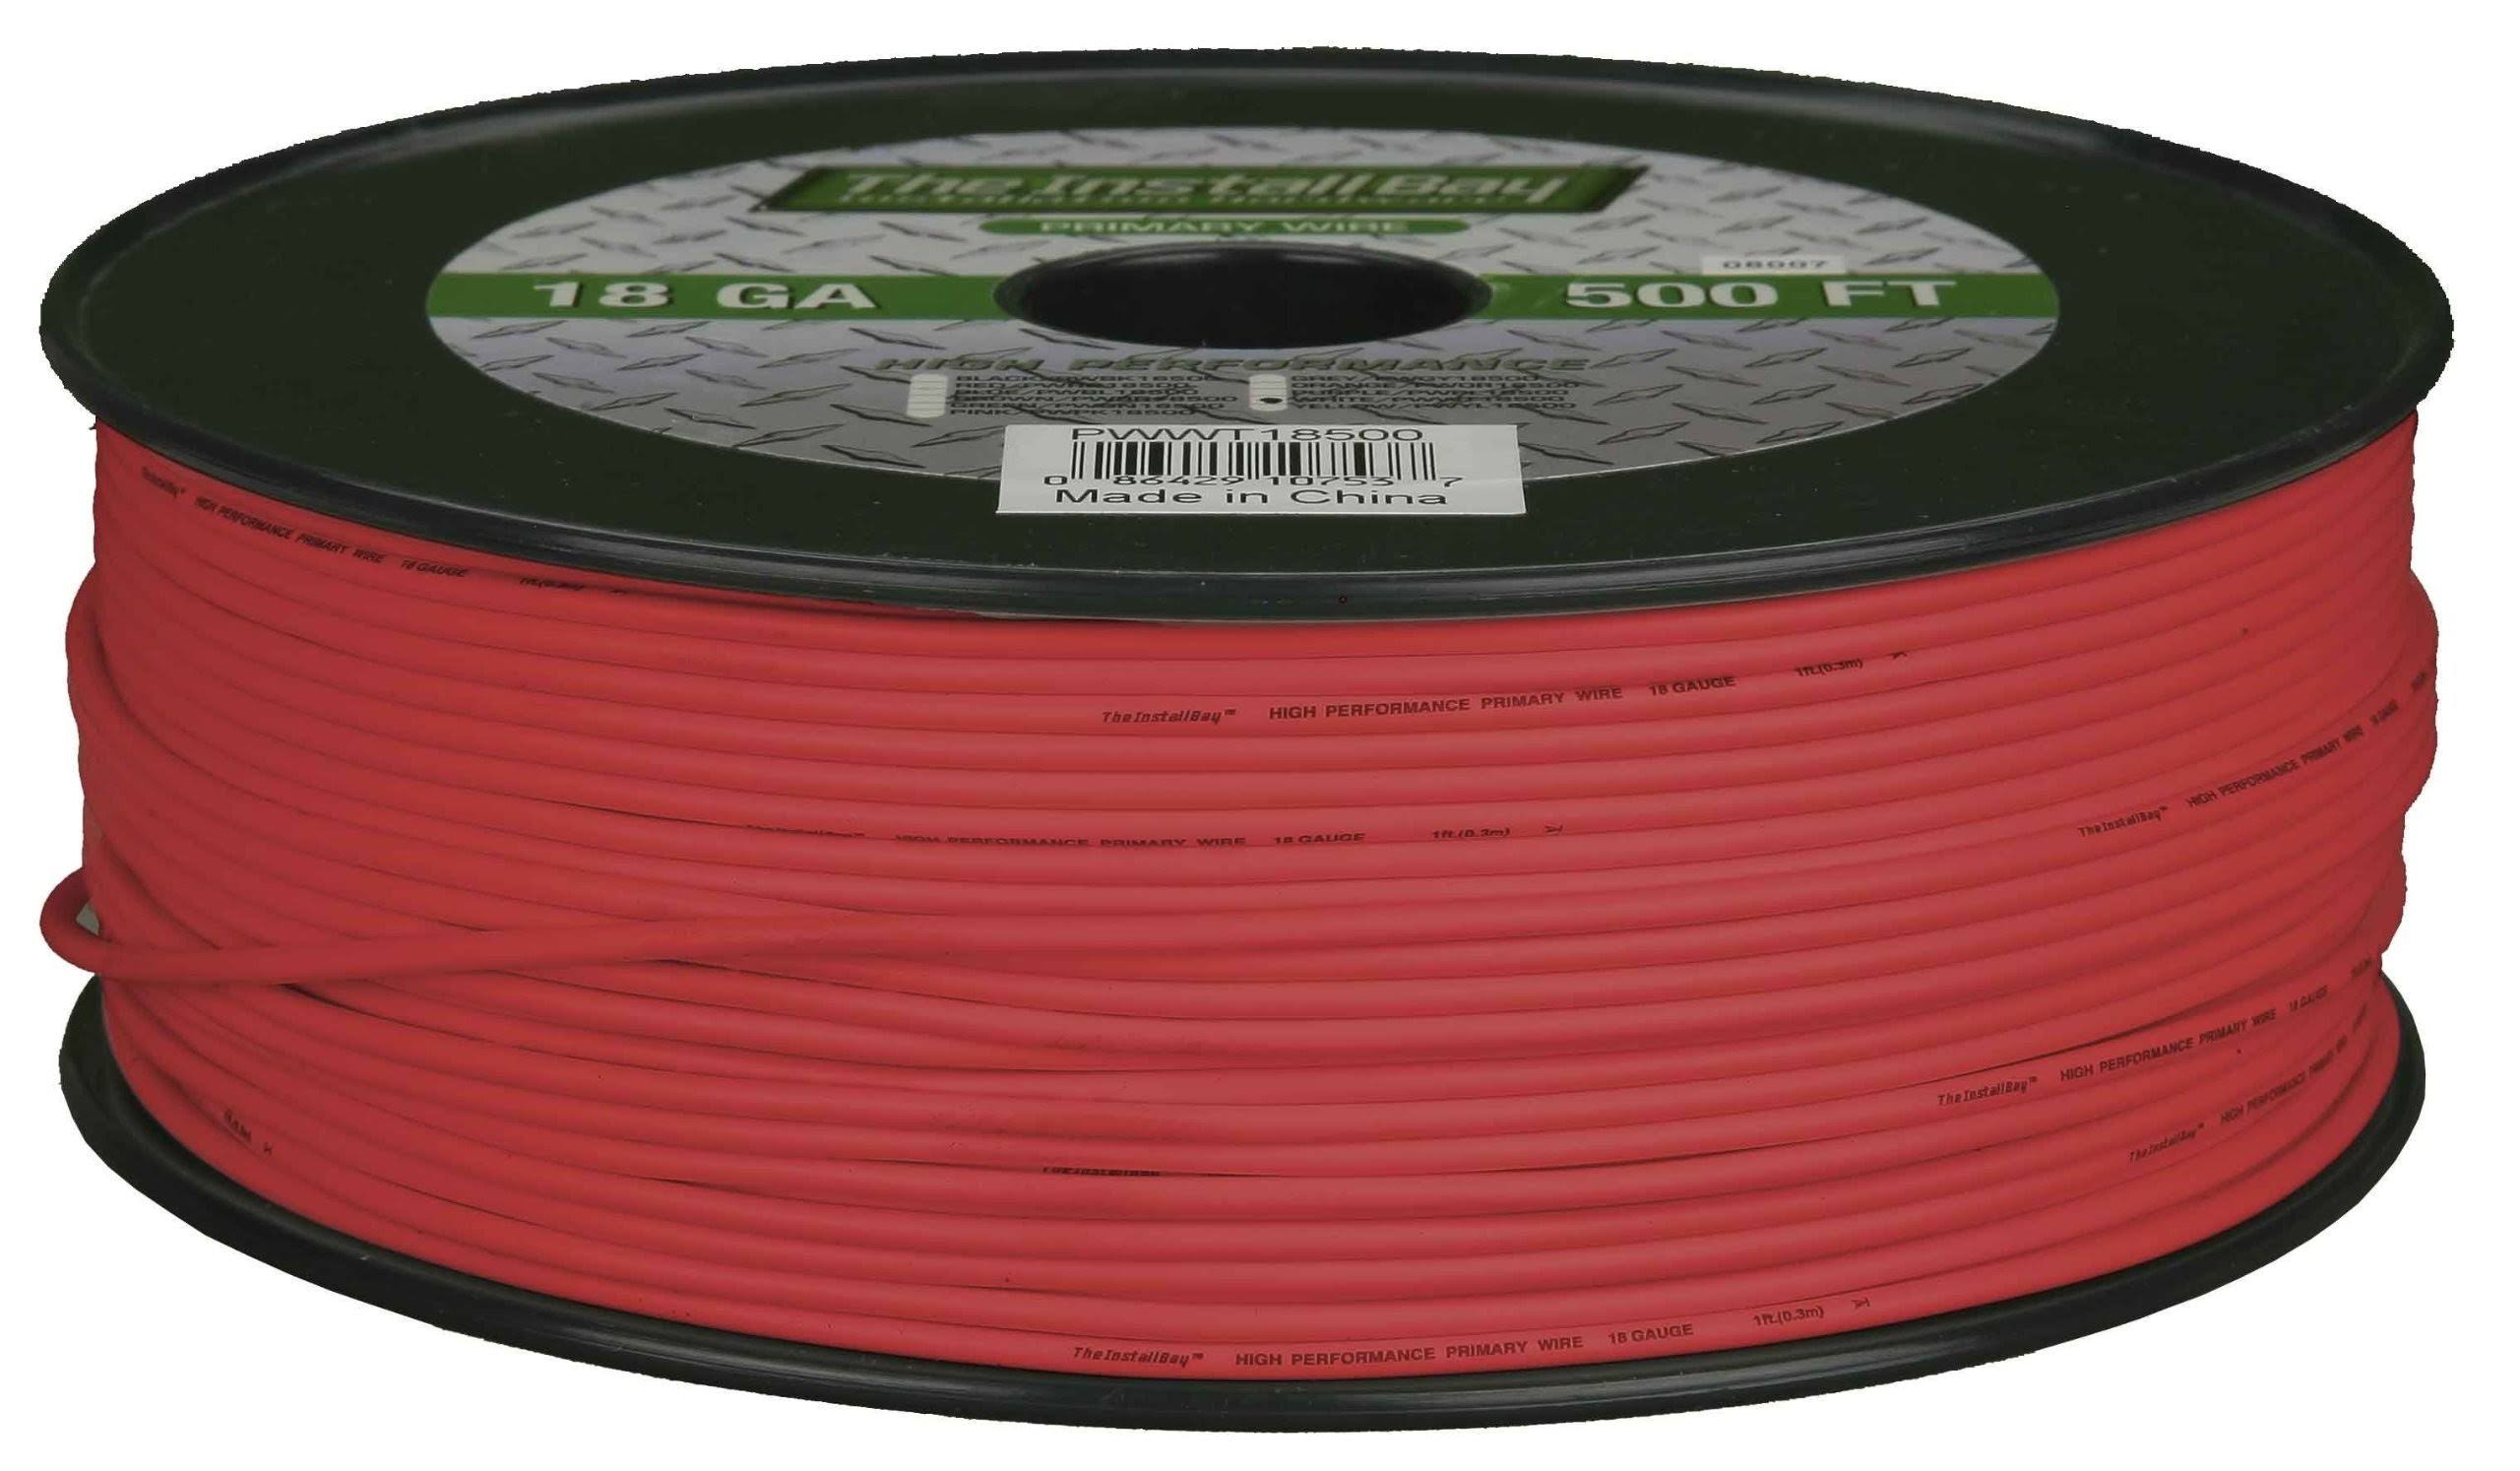 Install Bay PWRD14500 14-Gauge Primary Wire - Red (500 Feet)